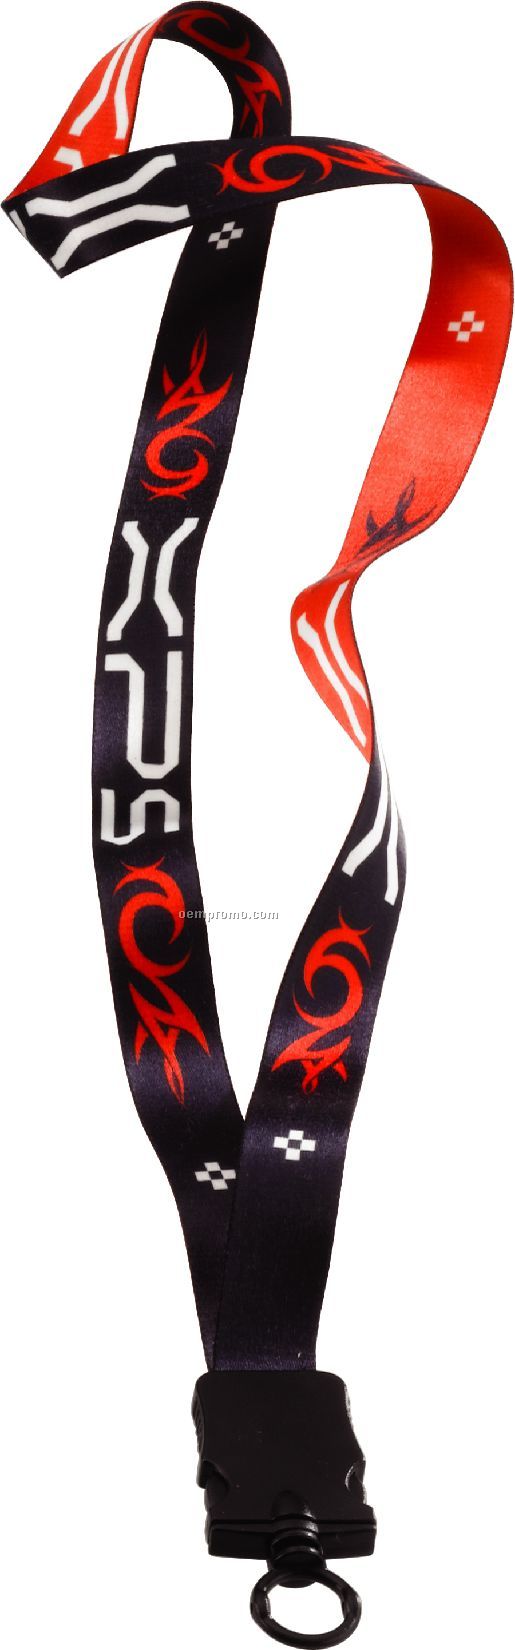 3/4" Rpet Dye Sublimated Lanyard With Plastic Snap Buckle Release & O-ring